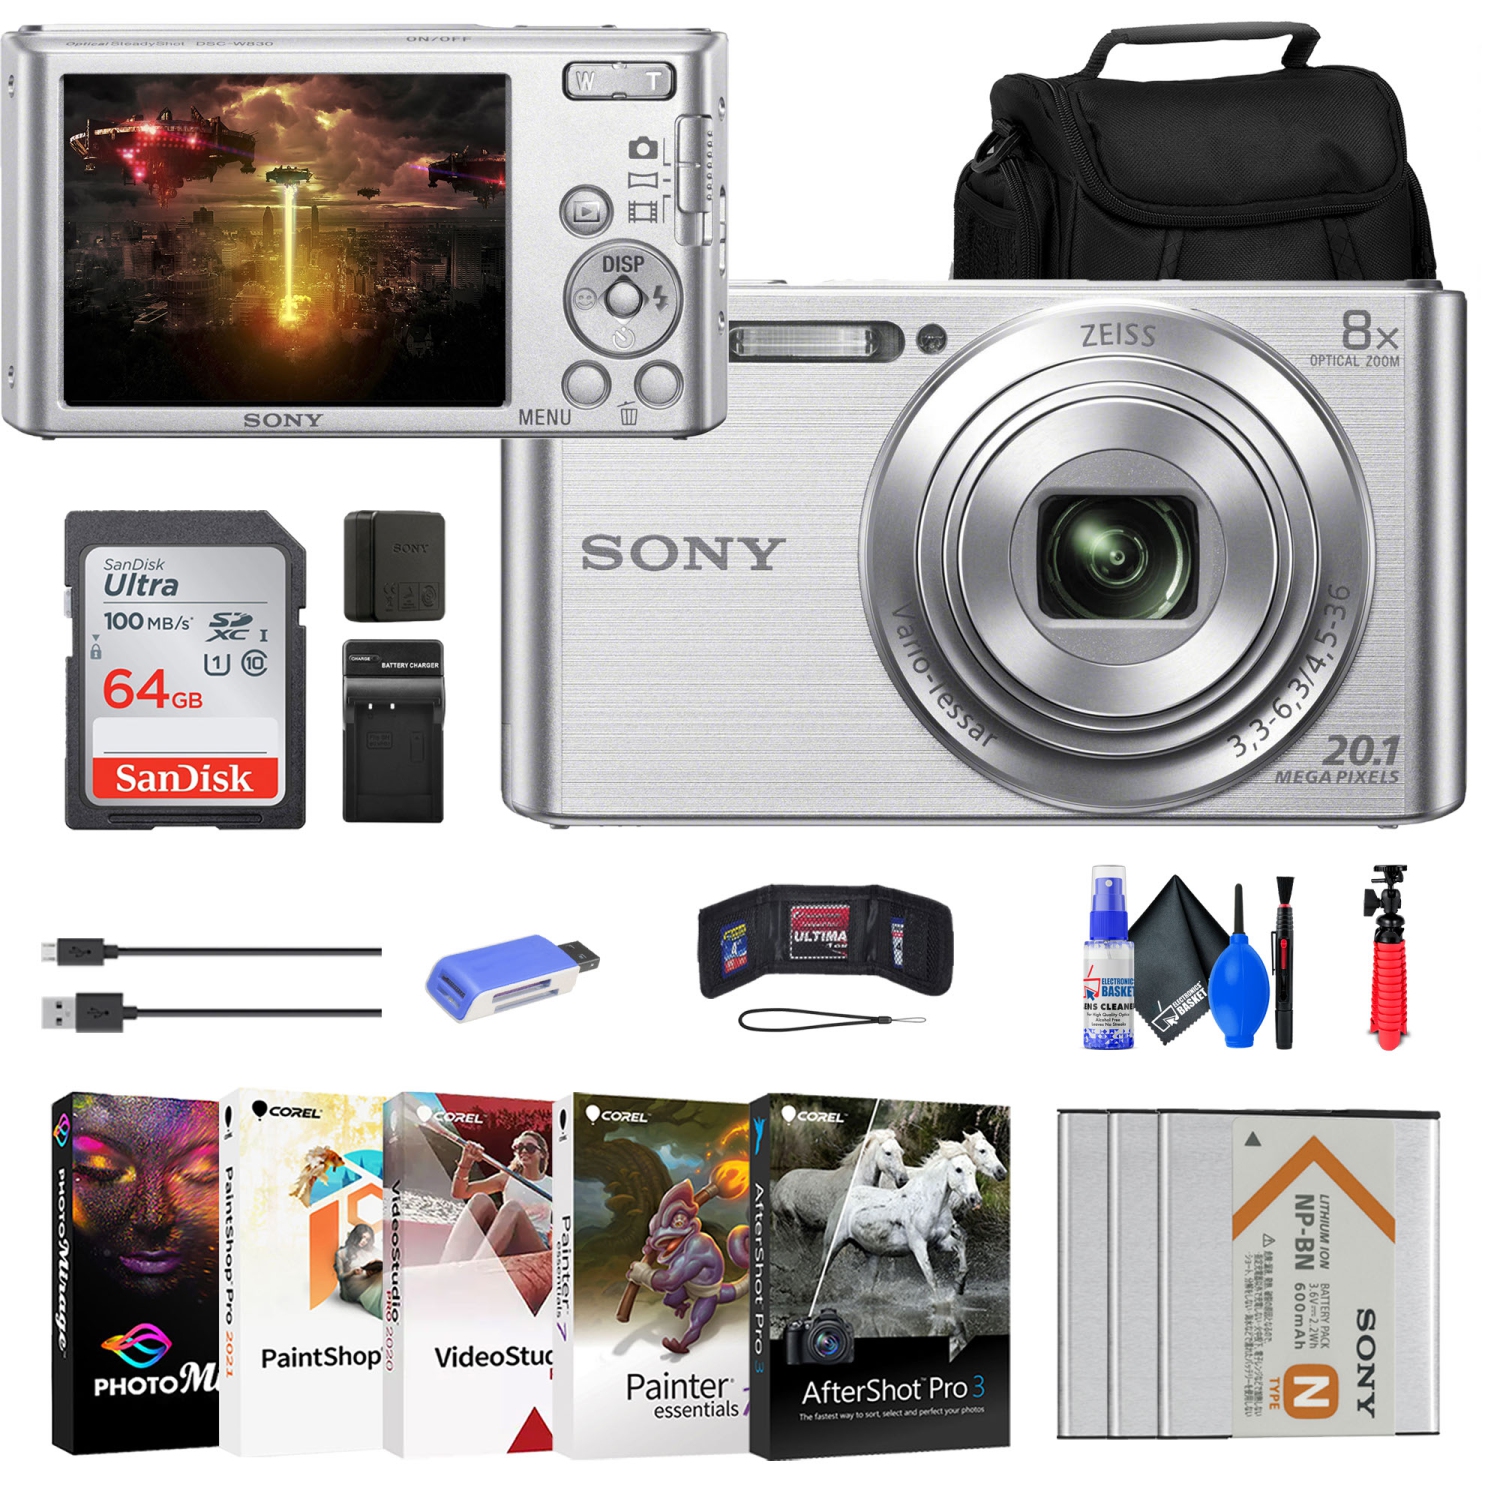 Sony DSC-W830 Digital Camera + 2 x NP-BN1 Battery + Case + Charger + More